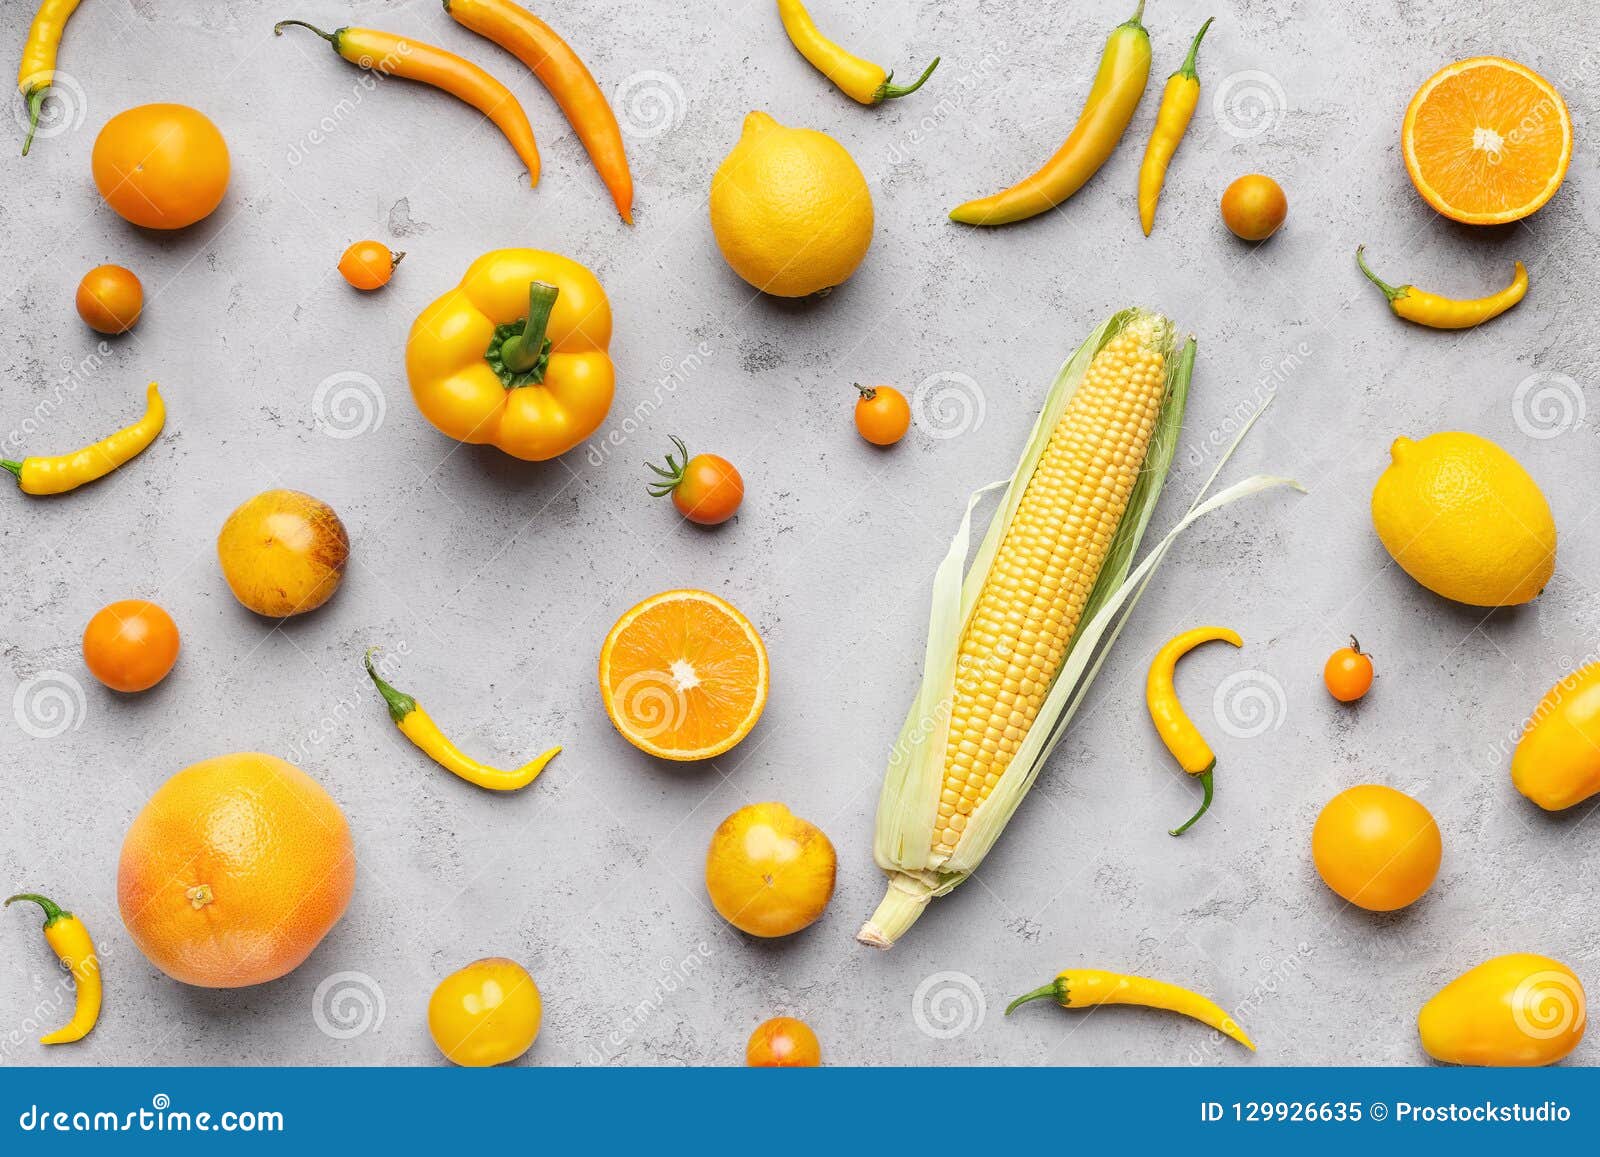 Collection Of Fresh Yellow Fruit And Vegetables On Gray Background ...